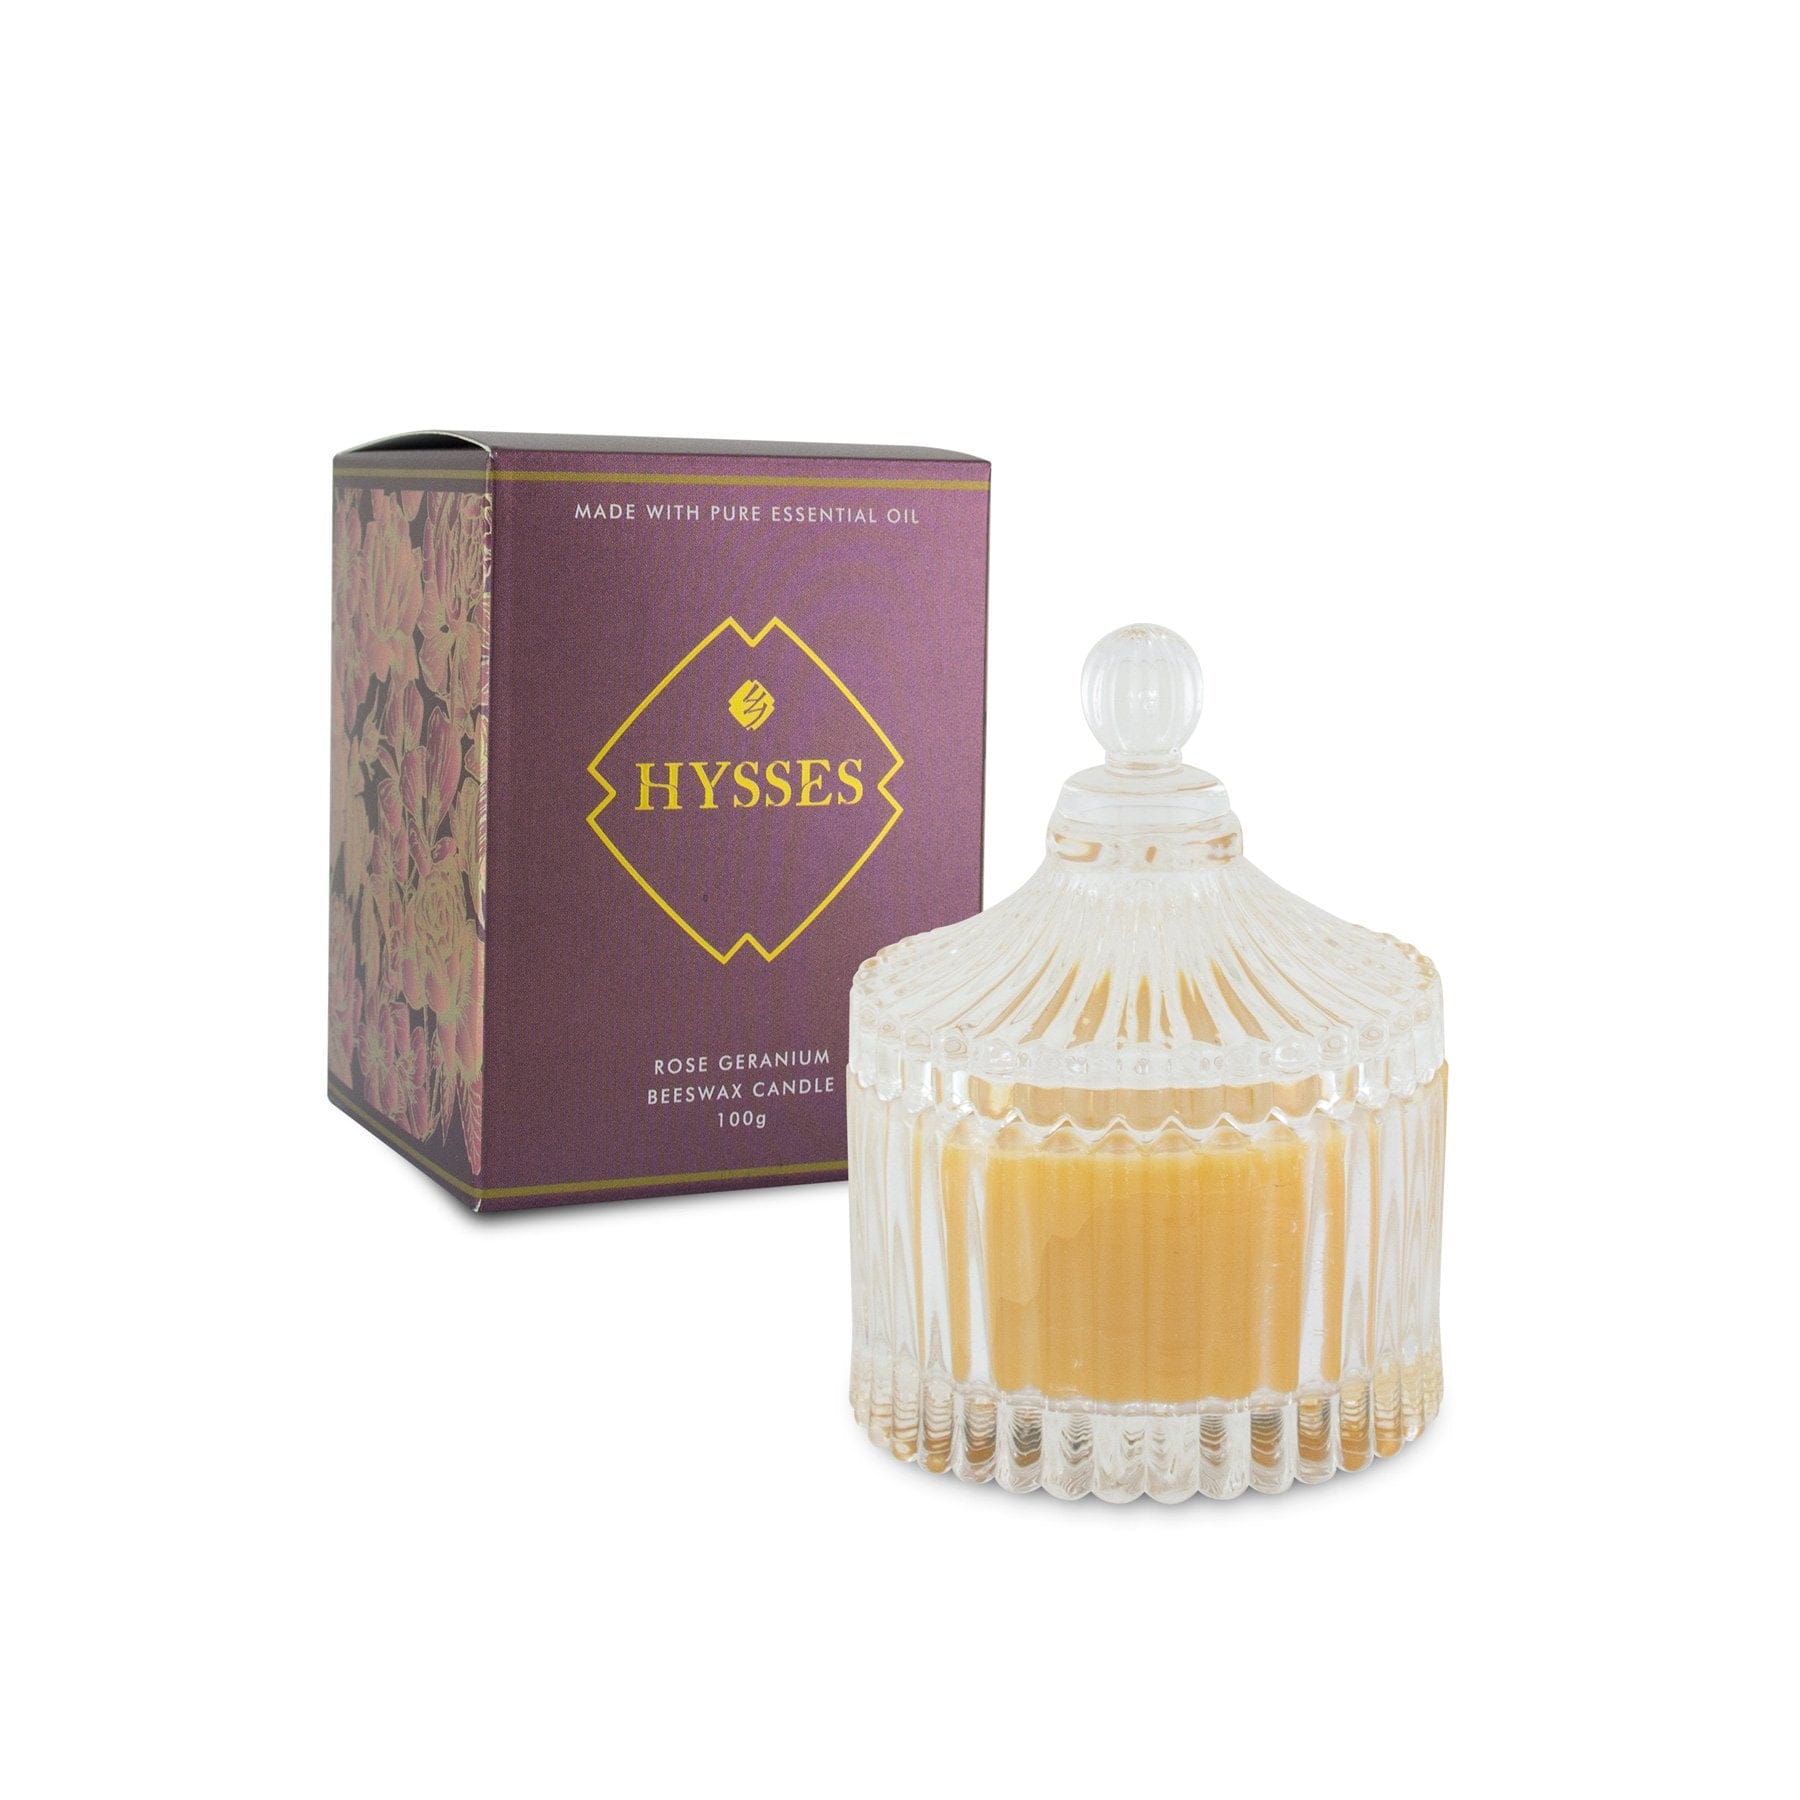 Hysses Home Scents 100g Beeswax Candle Rose Geranium